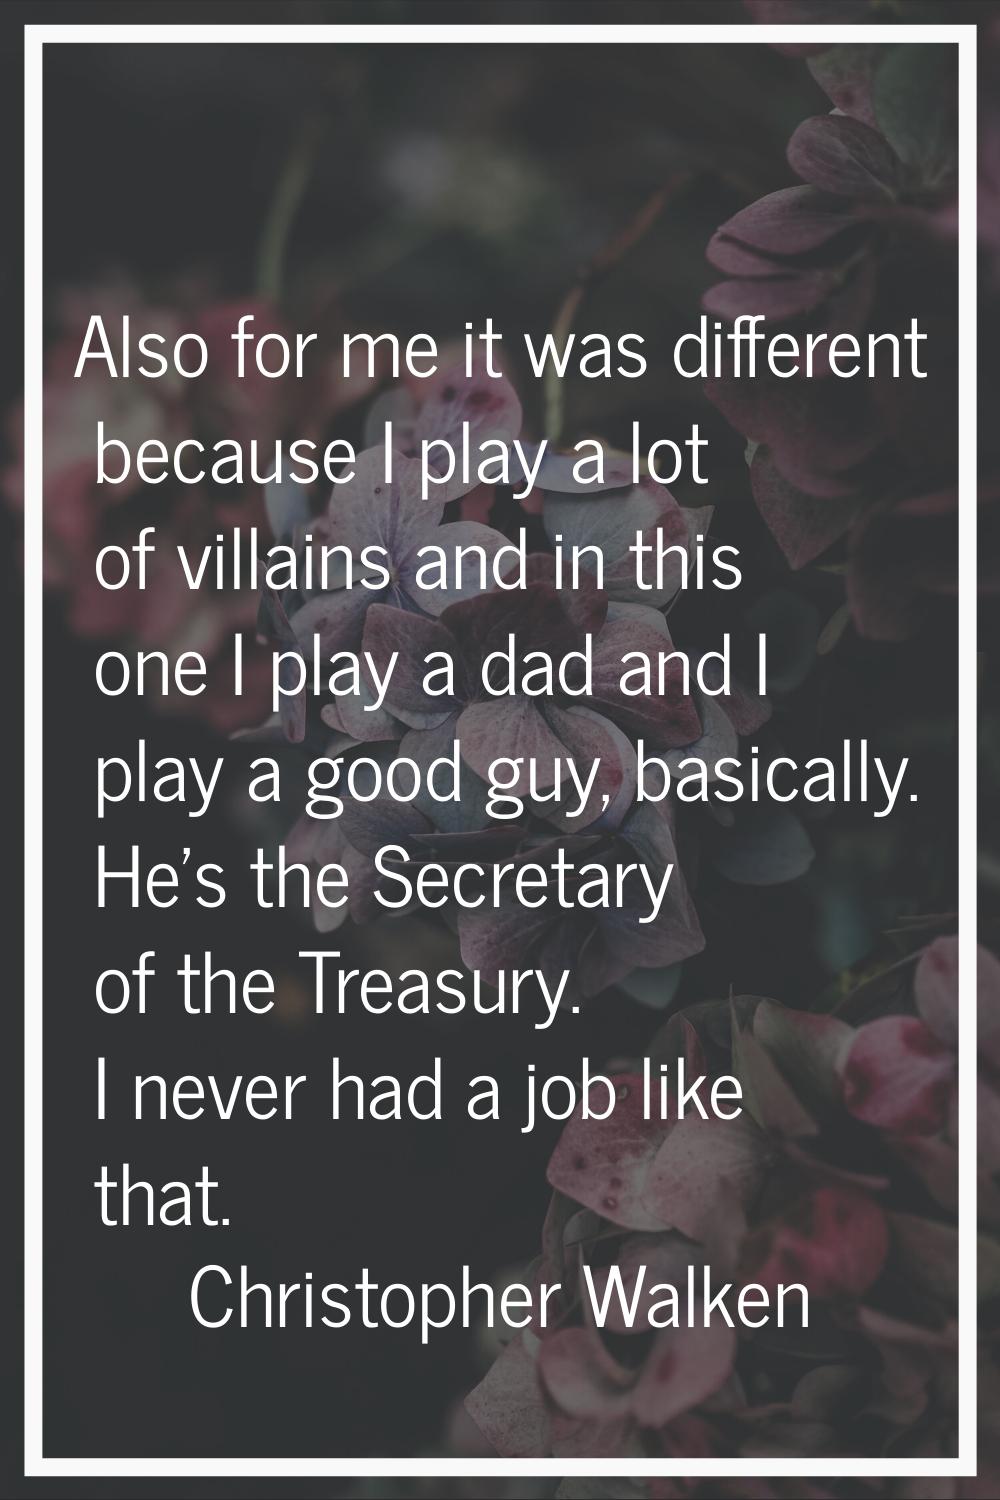 Also for me it was different because I play a lot of villains and in this one I play a dad and I pl